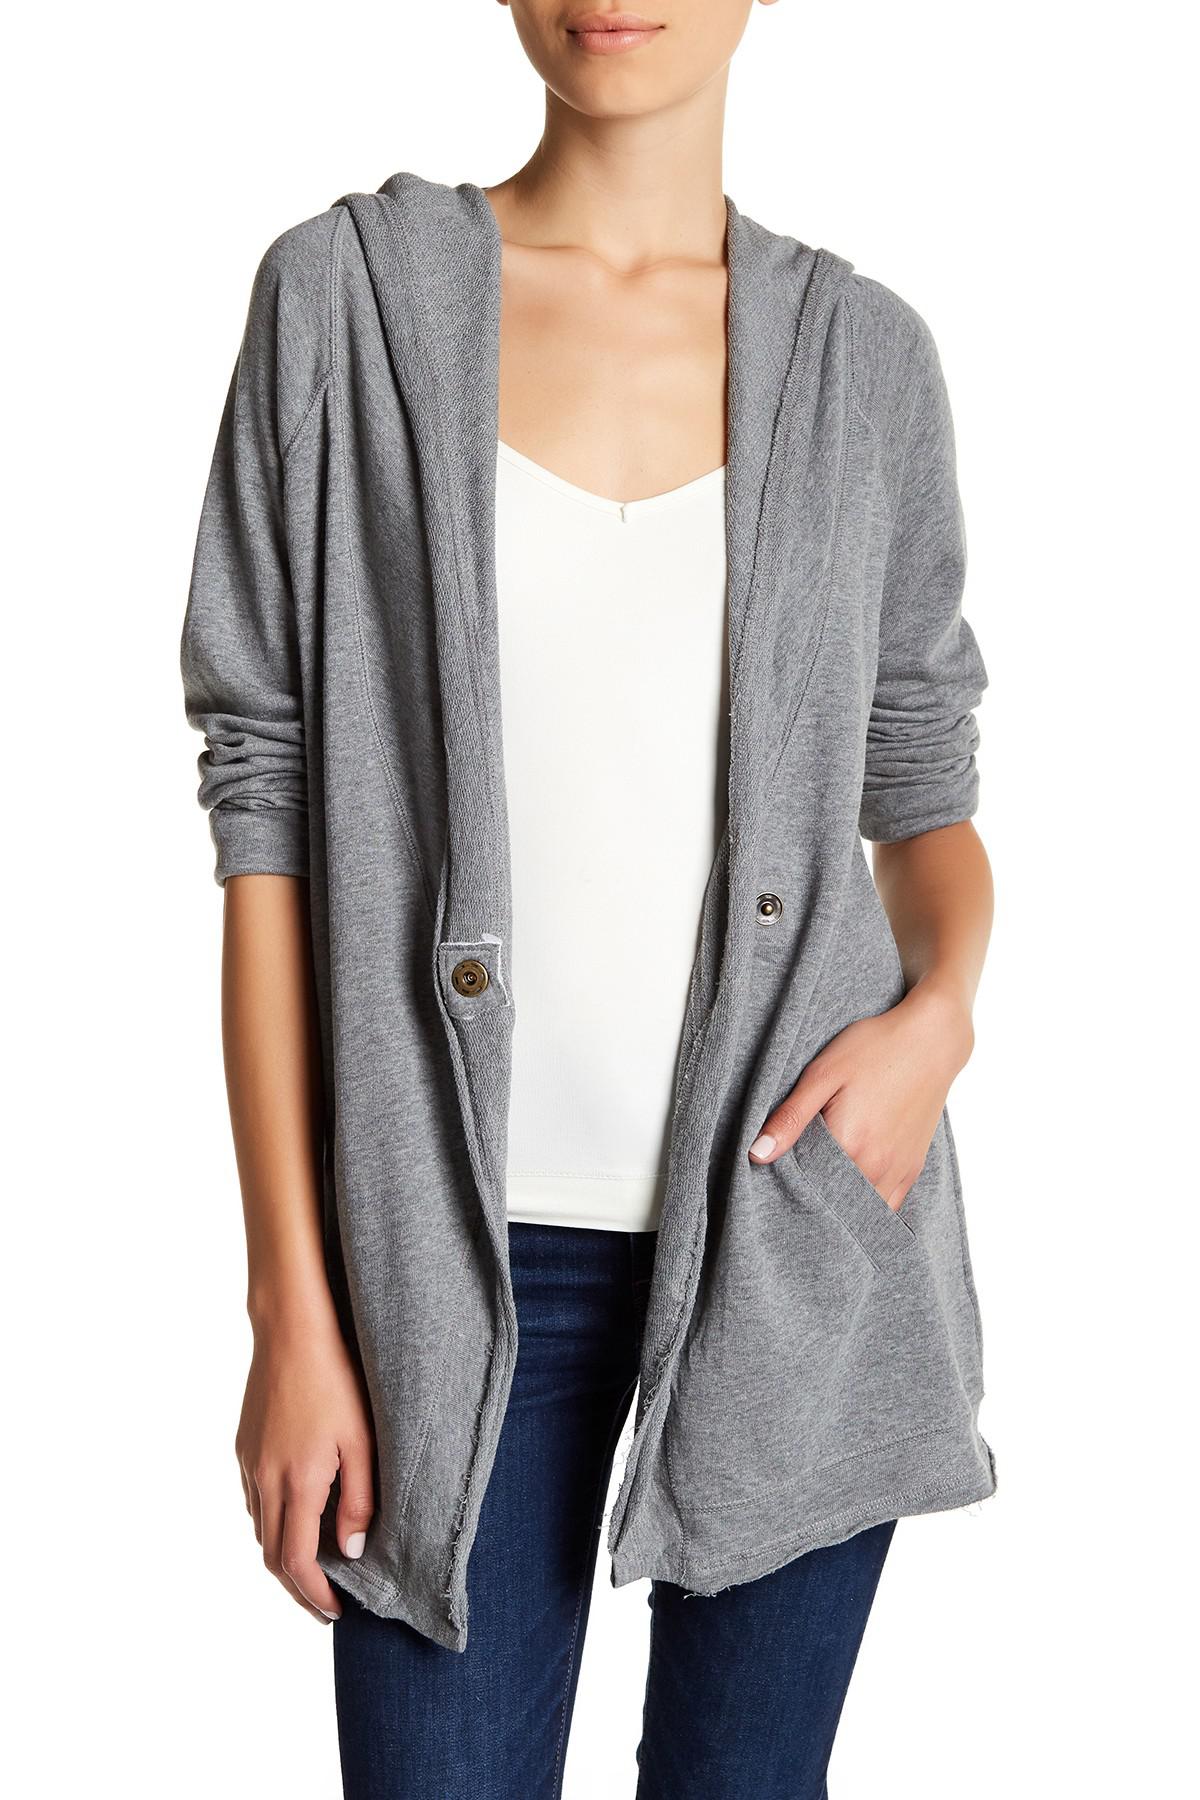 Lyst - Caslon Front Button Knit Jacket (petite) in Gray